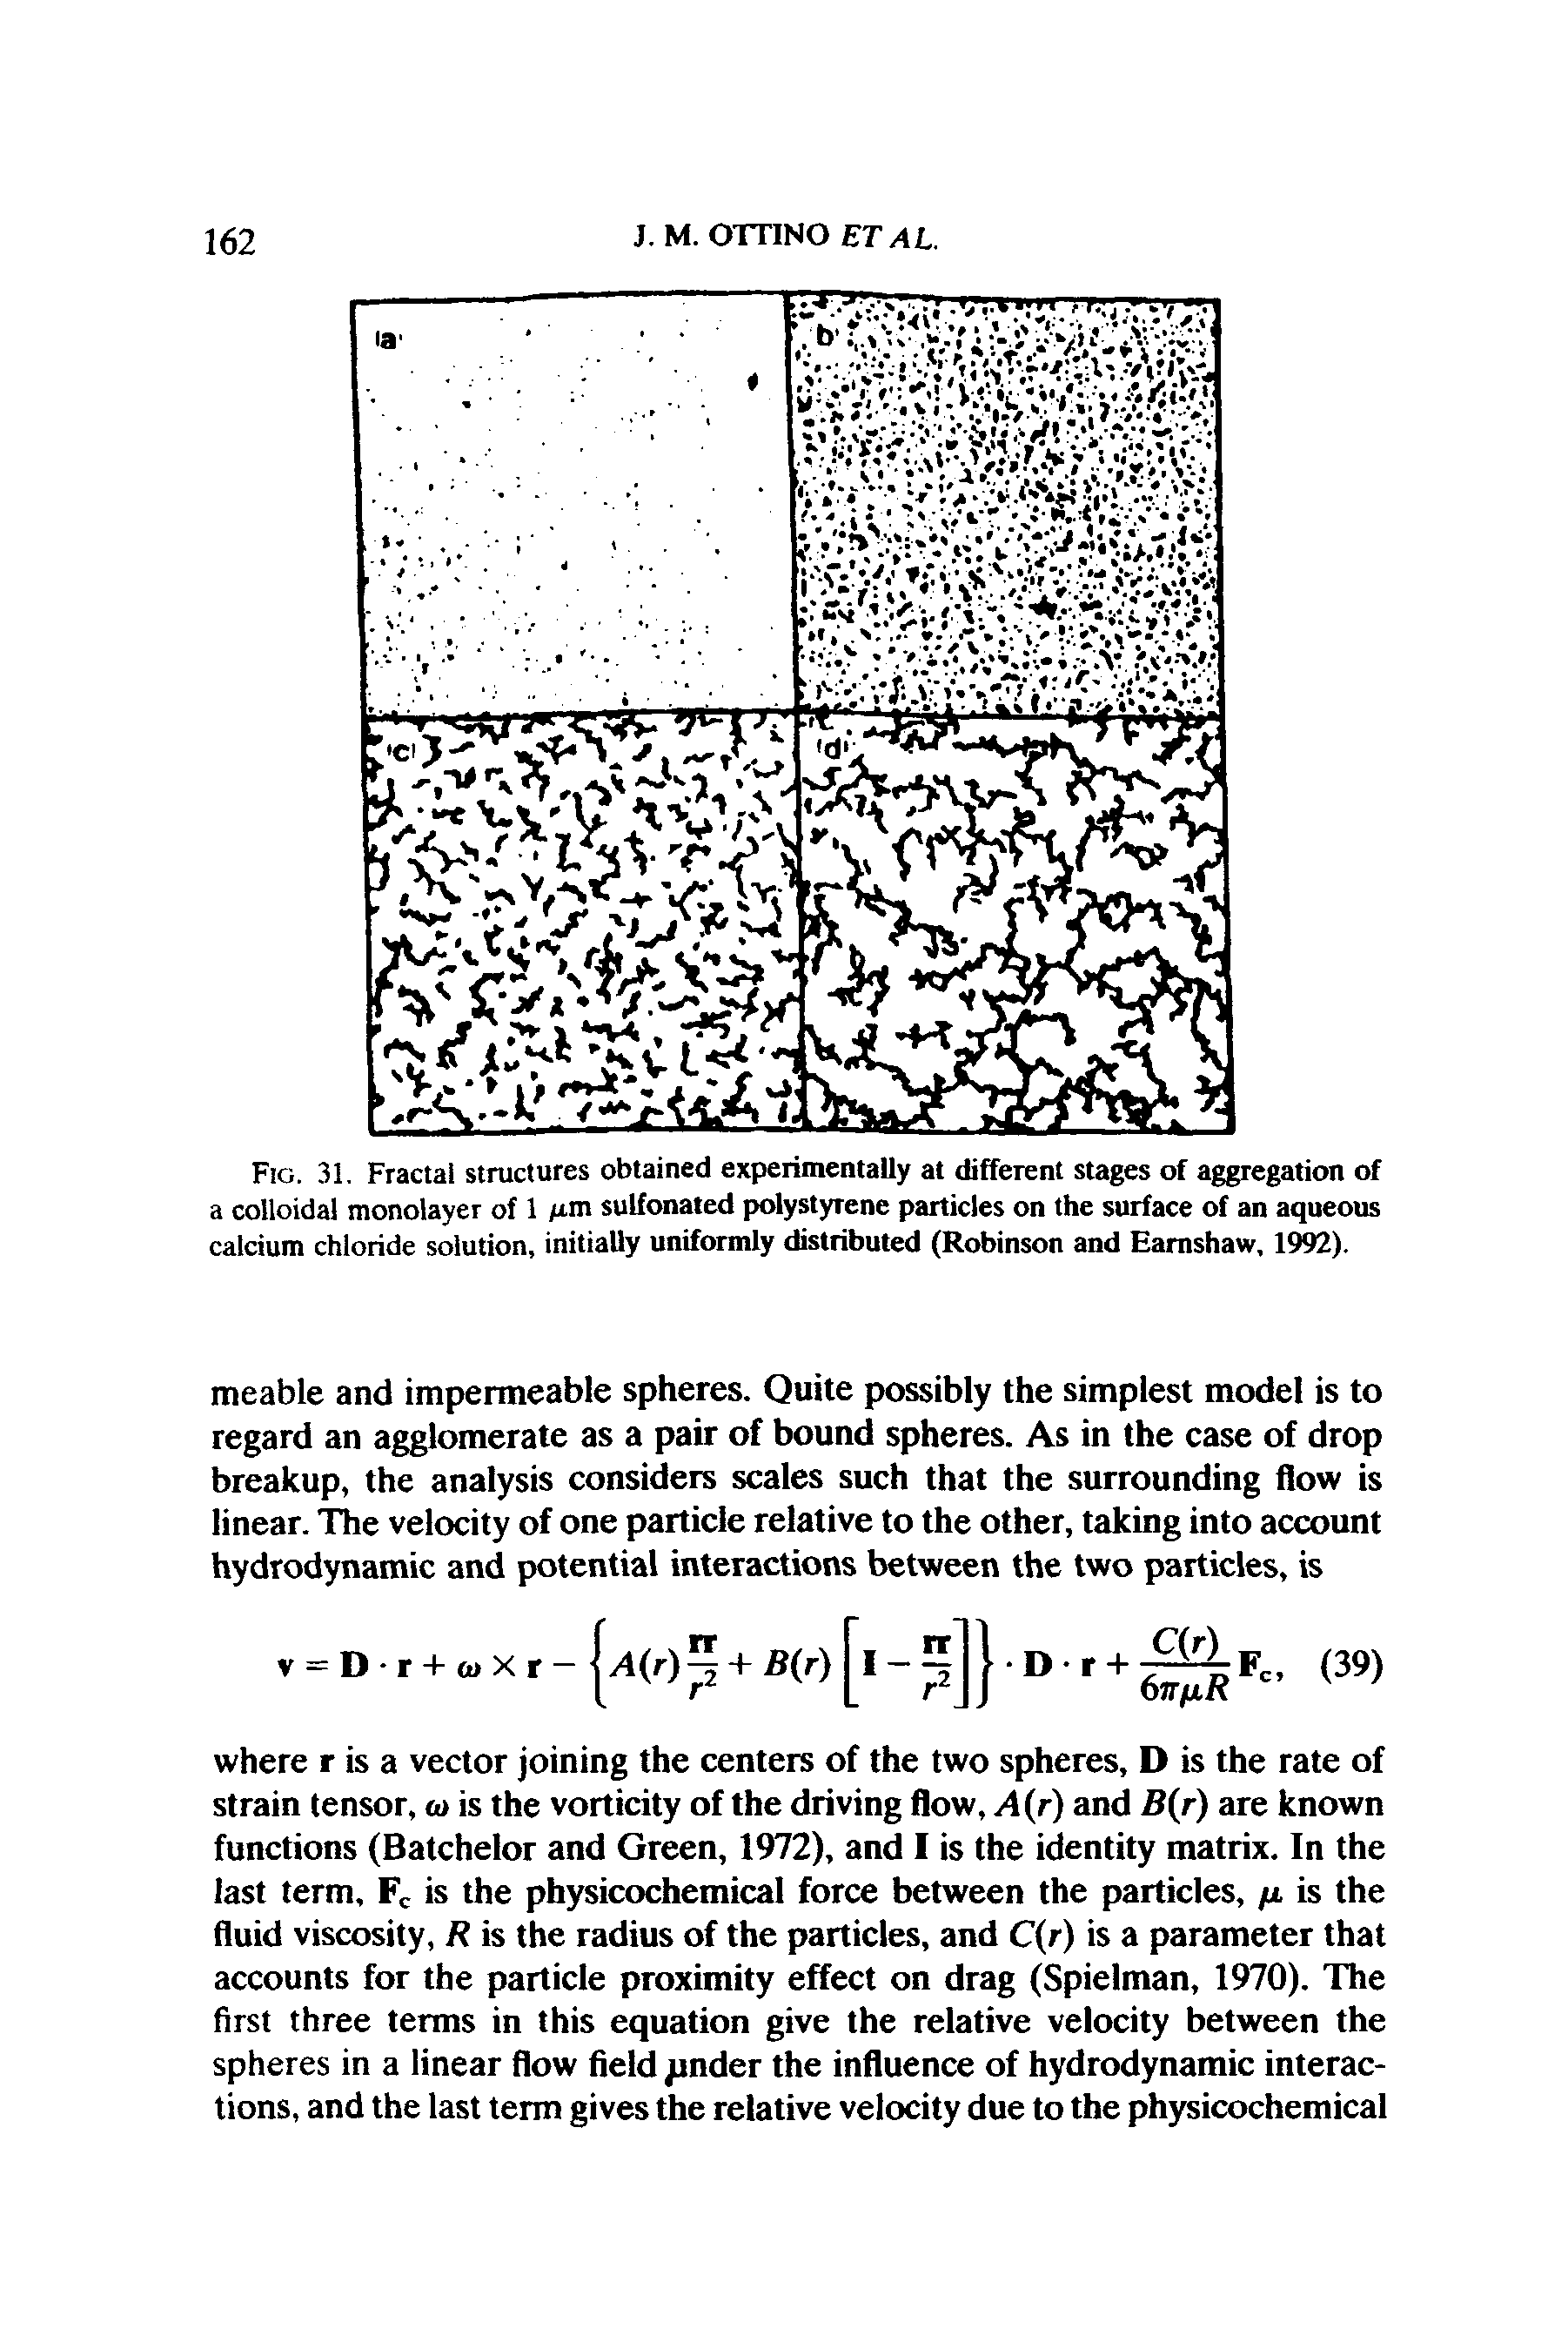 Fig. 31. Fractal structures obtained experimentally at different stages of aggregation of a colloidal monolayer of 1 /im sulfonated polystyrene particles on the surface of an aqueous calcium chloride solution, initially uniformly distributed (Robinson and Earnshaw, 1992).